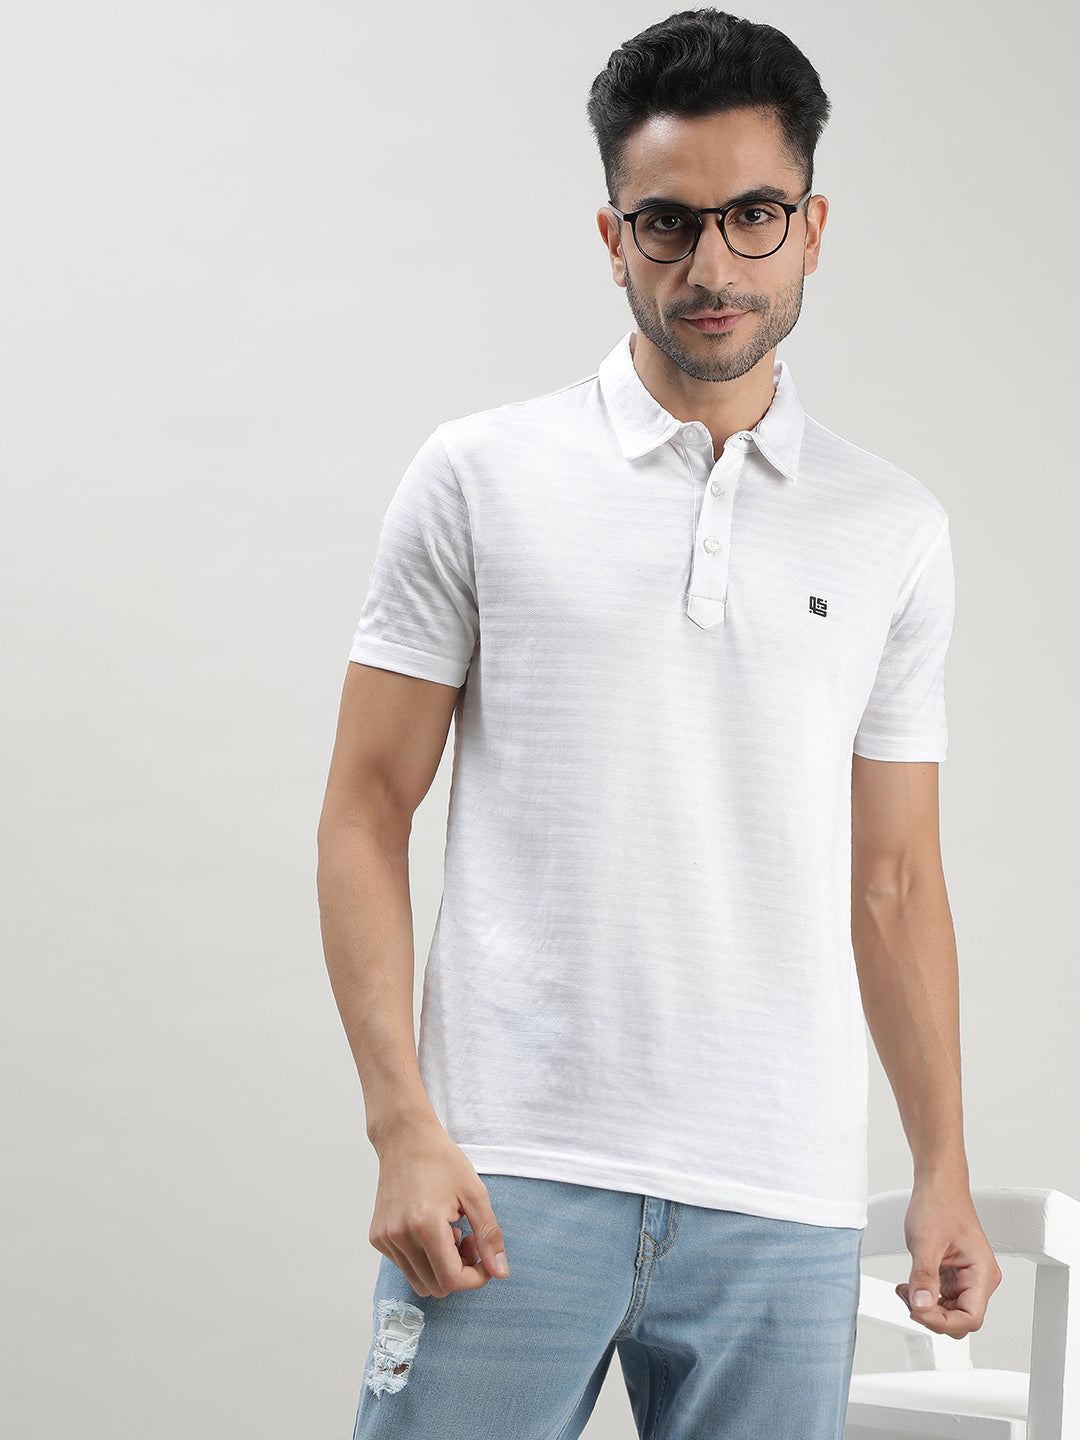 White Polo T-shirt for Men at Loom & Spin